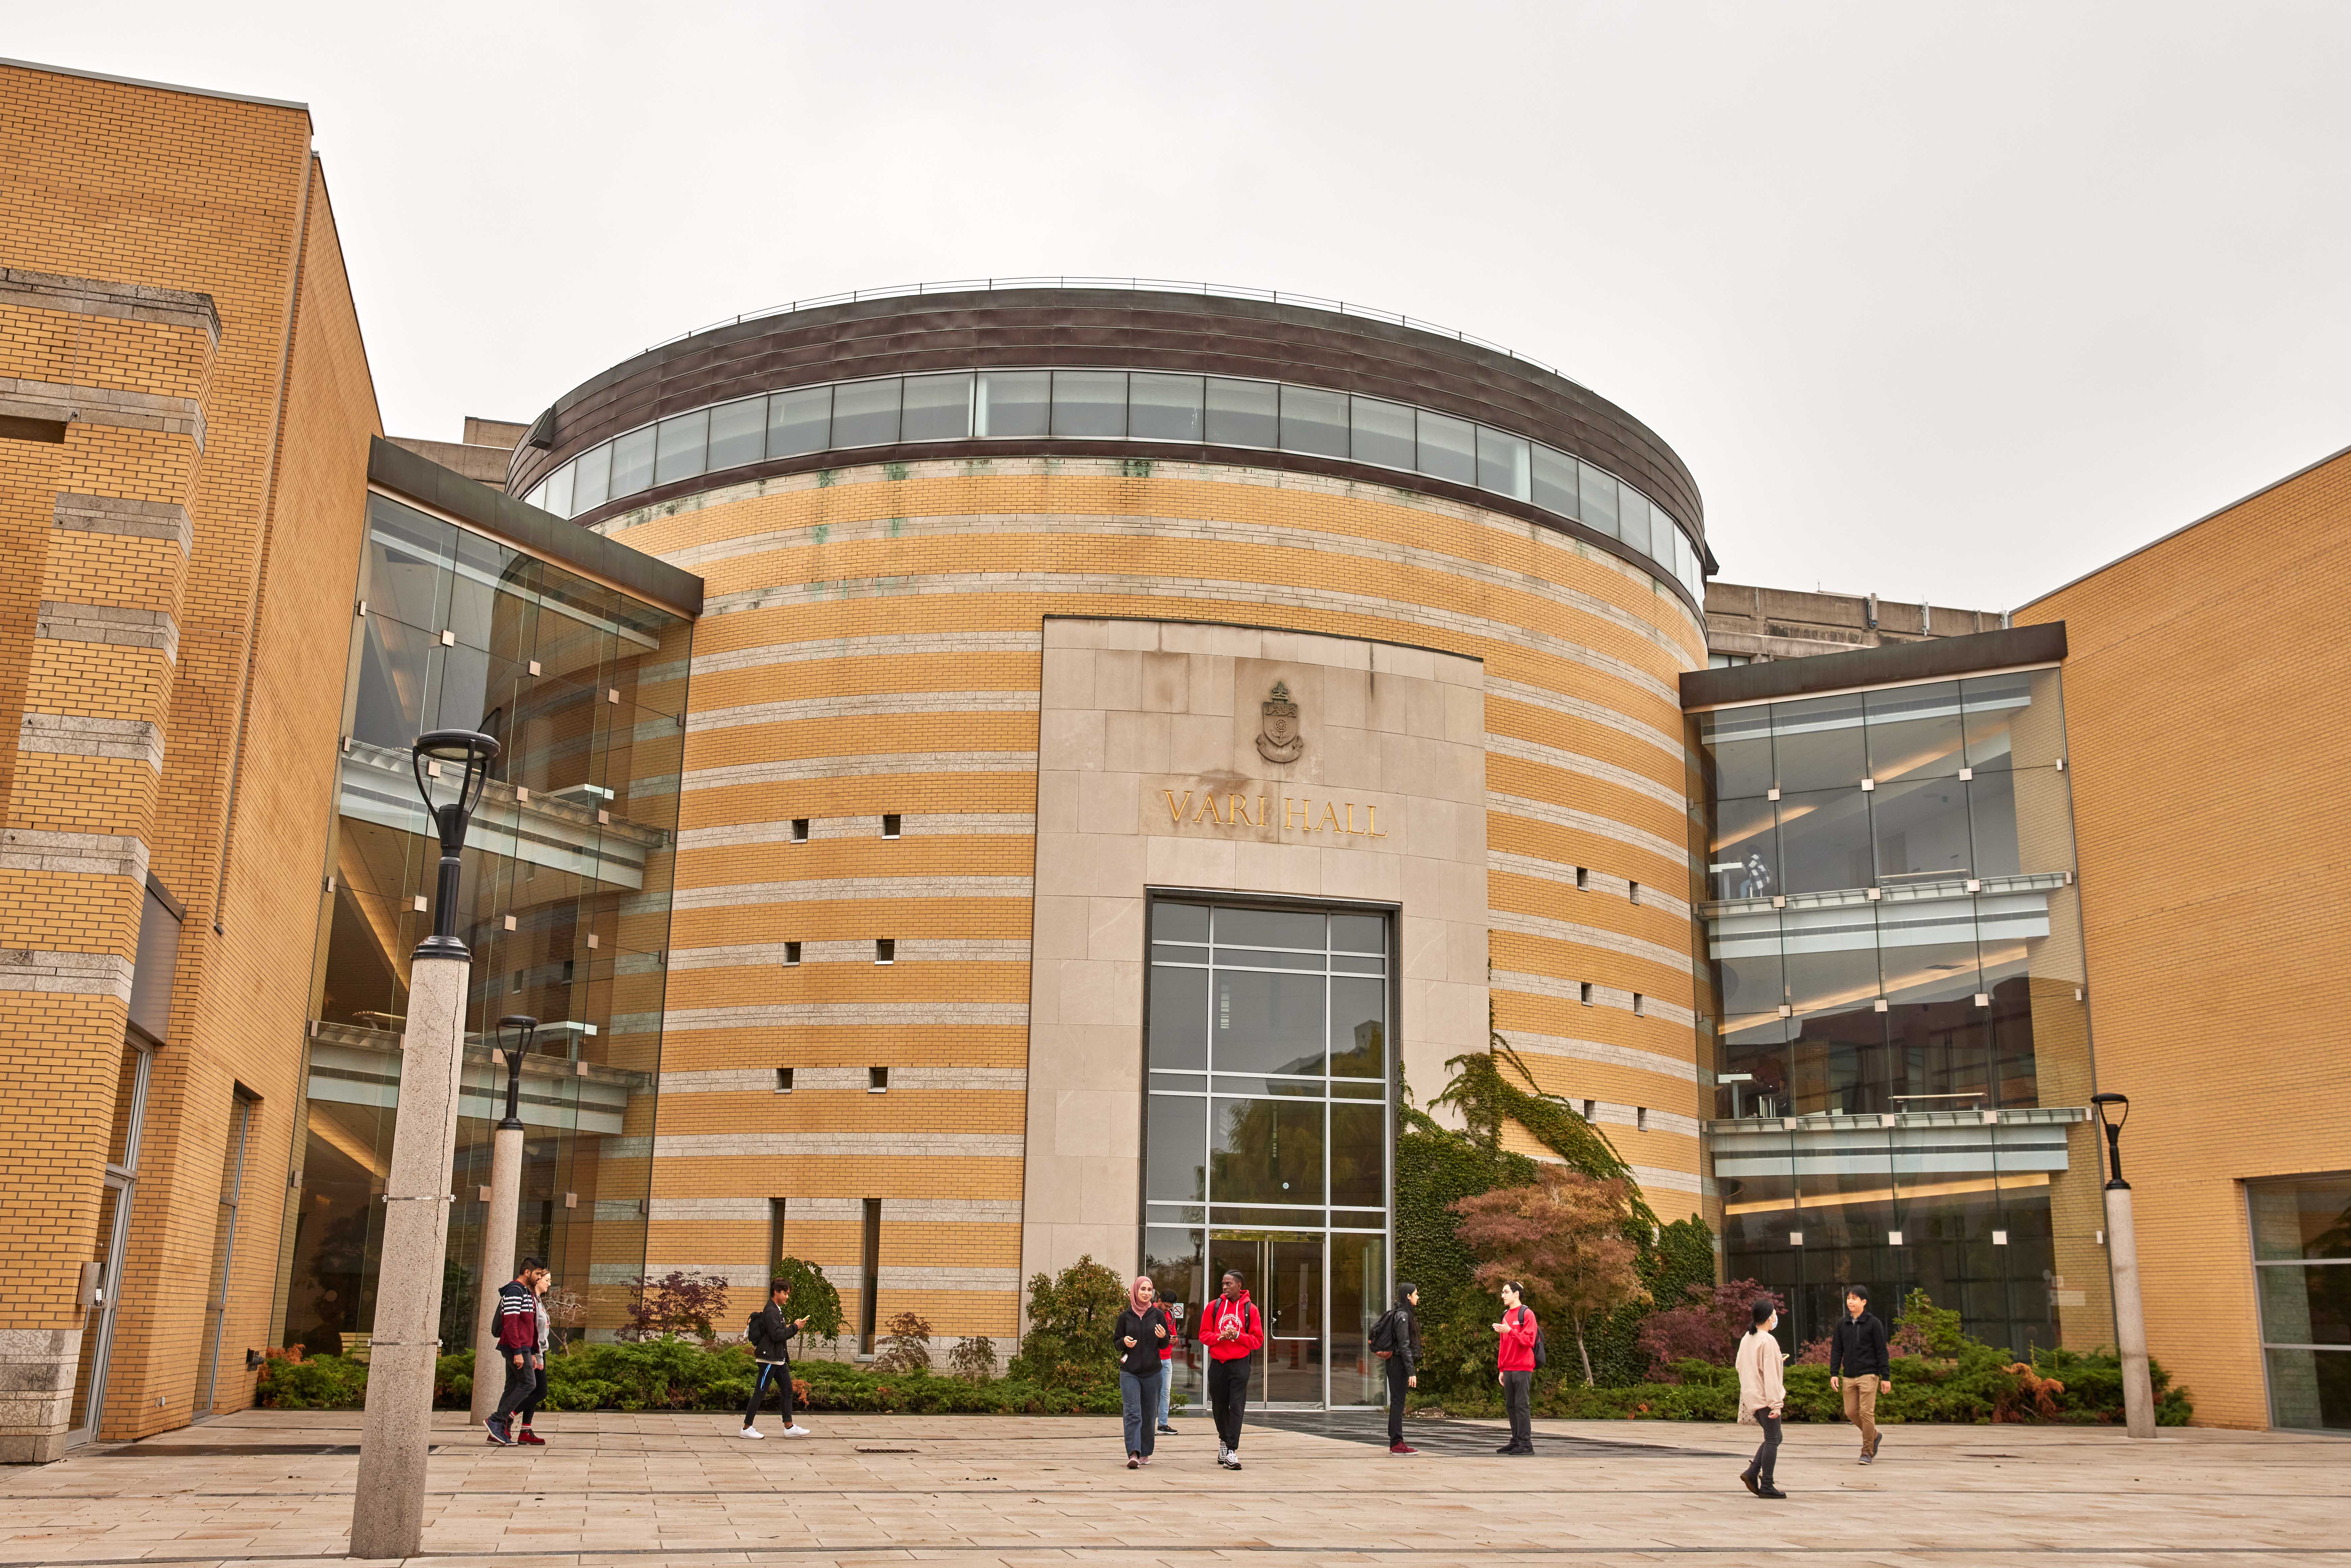 Vari Hall exterior with students walking in front